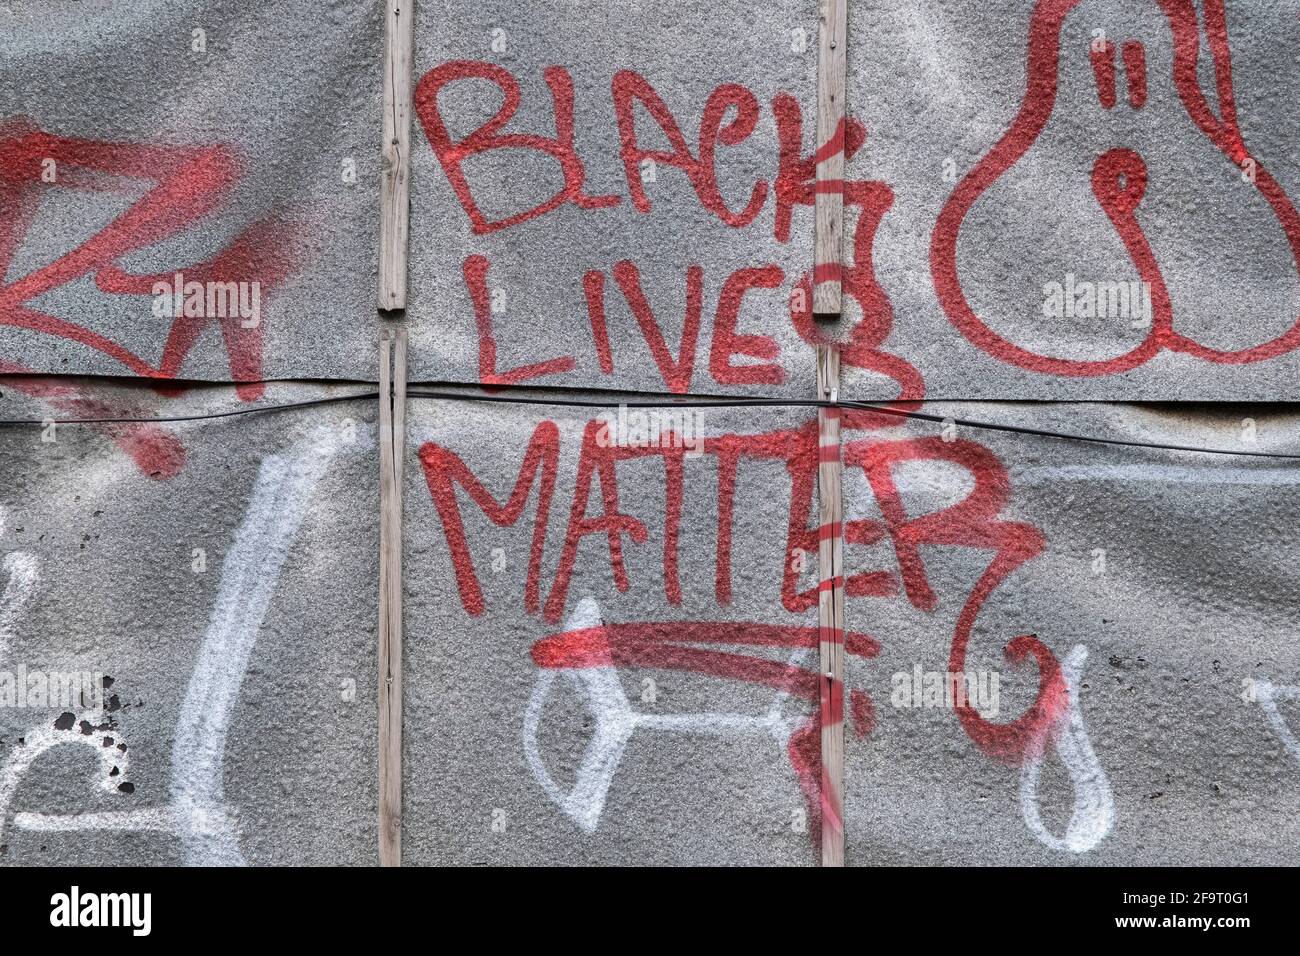 BLM Black Lives Matter and other graffiti in Waterloo on 13th April 2021 in London, United Kingdom. Black Lives Matter is an international human rights movement, originating in the African-American community, that campaigns against violence and systemic racism towards black people. Stock Photo